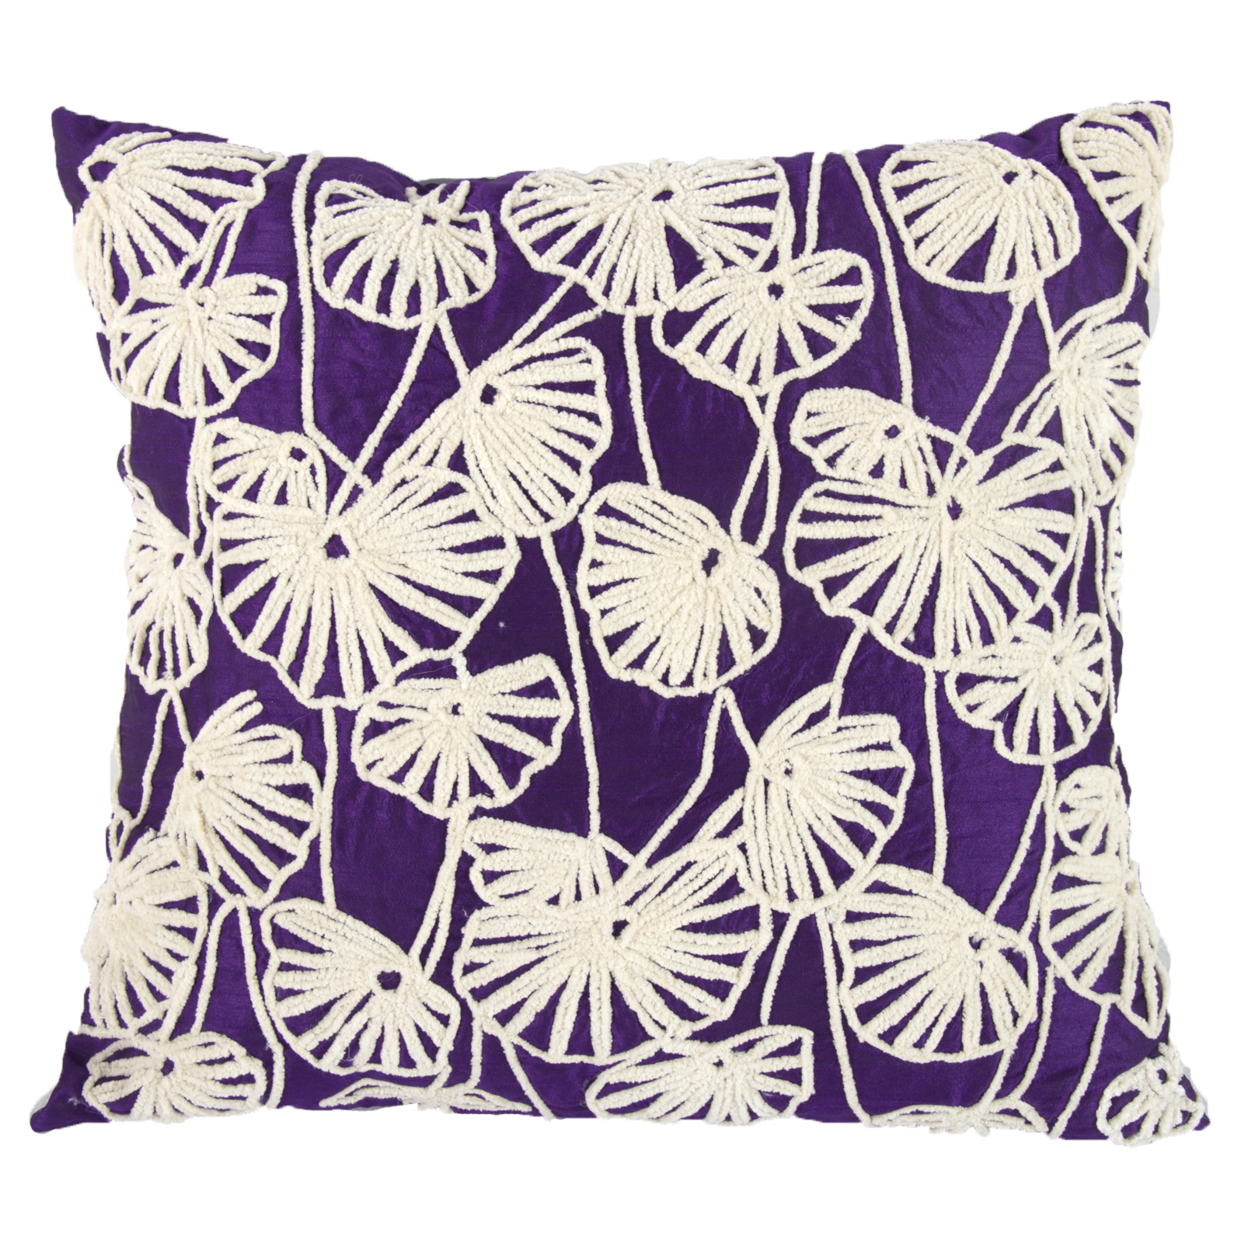 20 X 18 Inch Cotton Pillow With Dupioni Embroidery, Set Of 2, White And Purple- Saltoro Sherpi